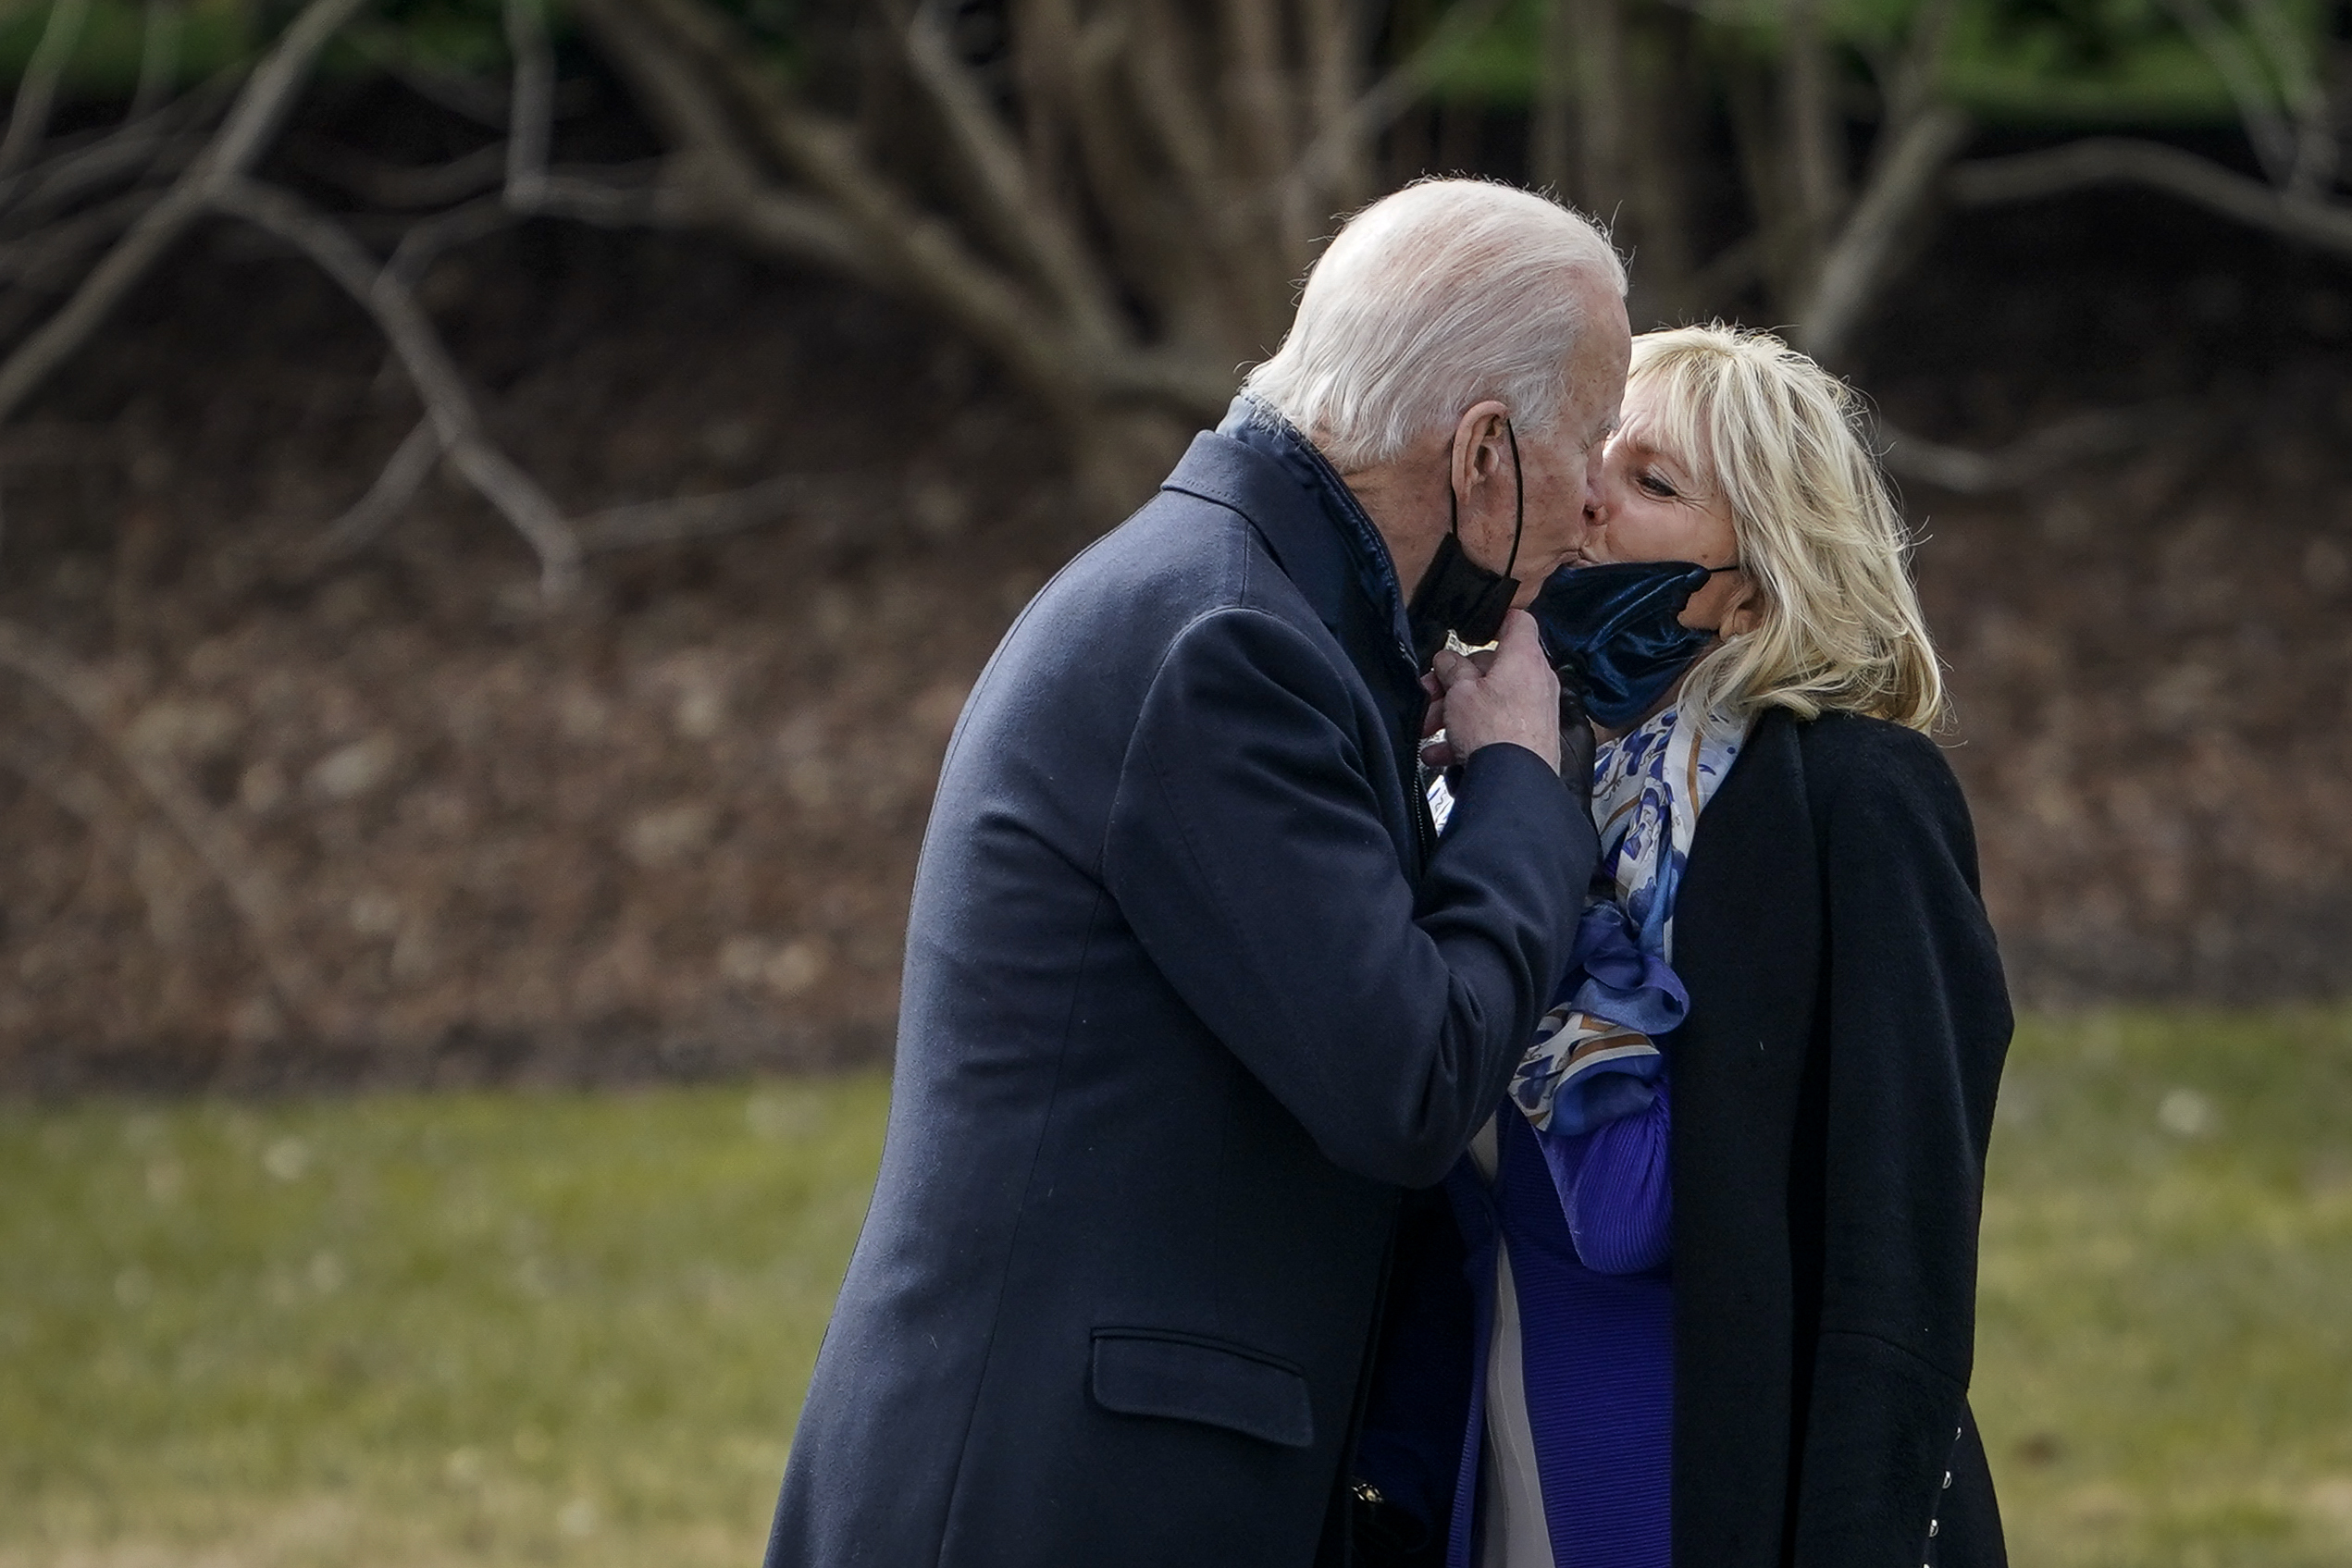 WASHINGTON, DC - JANUARY 29: U.S. President Joe Biden kisses his wife first lady Dr. Jill Biden as he walks to Marine One on the South Lawn of the White House on January 29, 2021 in Washington, DC. President Biden is traveling to Walter Reed National Military Medical Center to visit with wounded service members. (Photo by Drew Angerer/Getty Images)